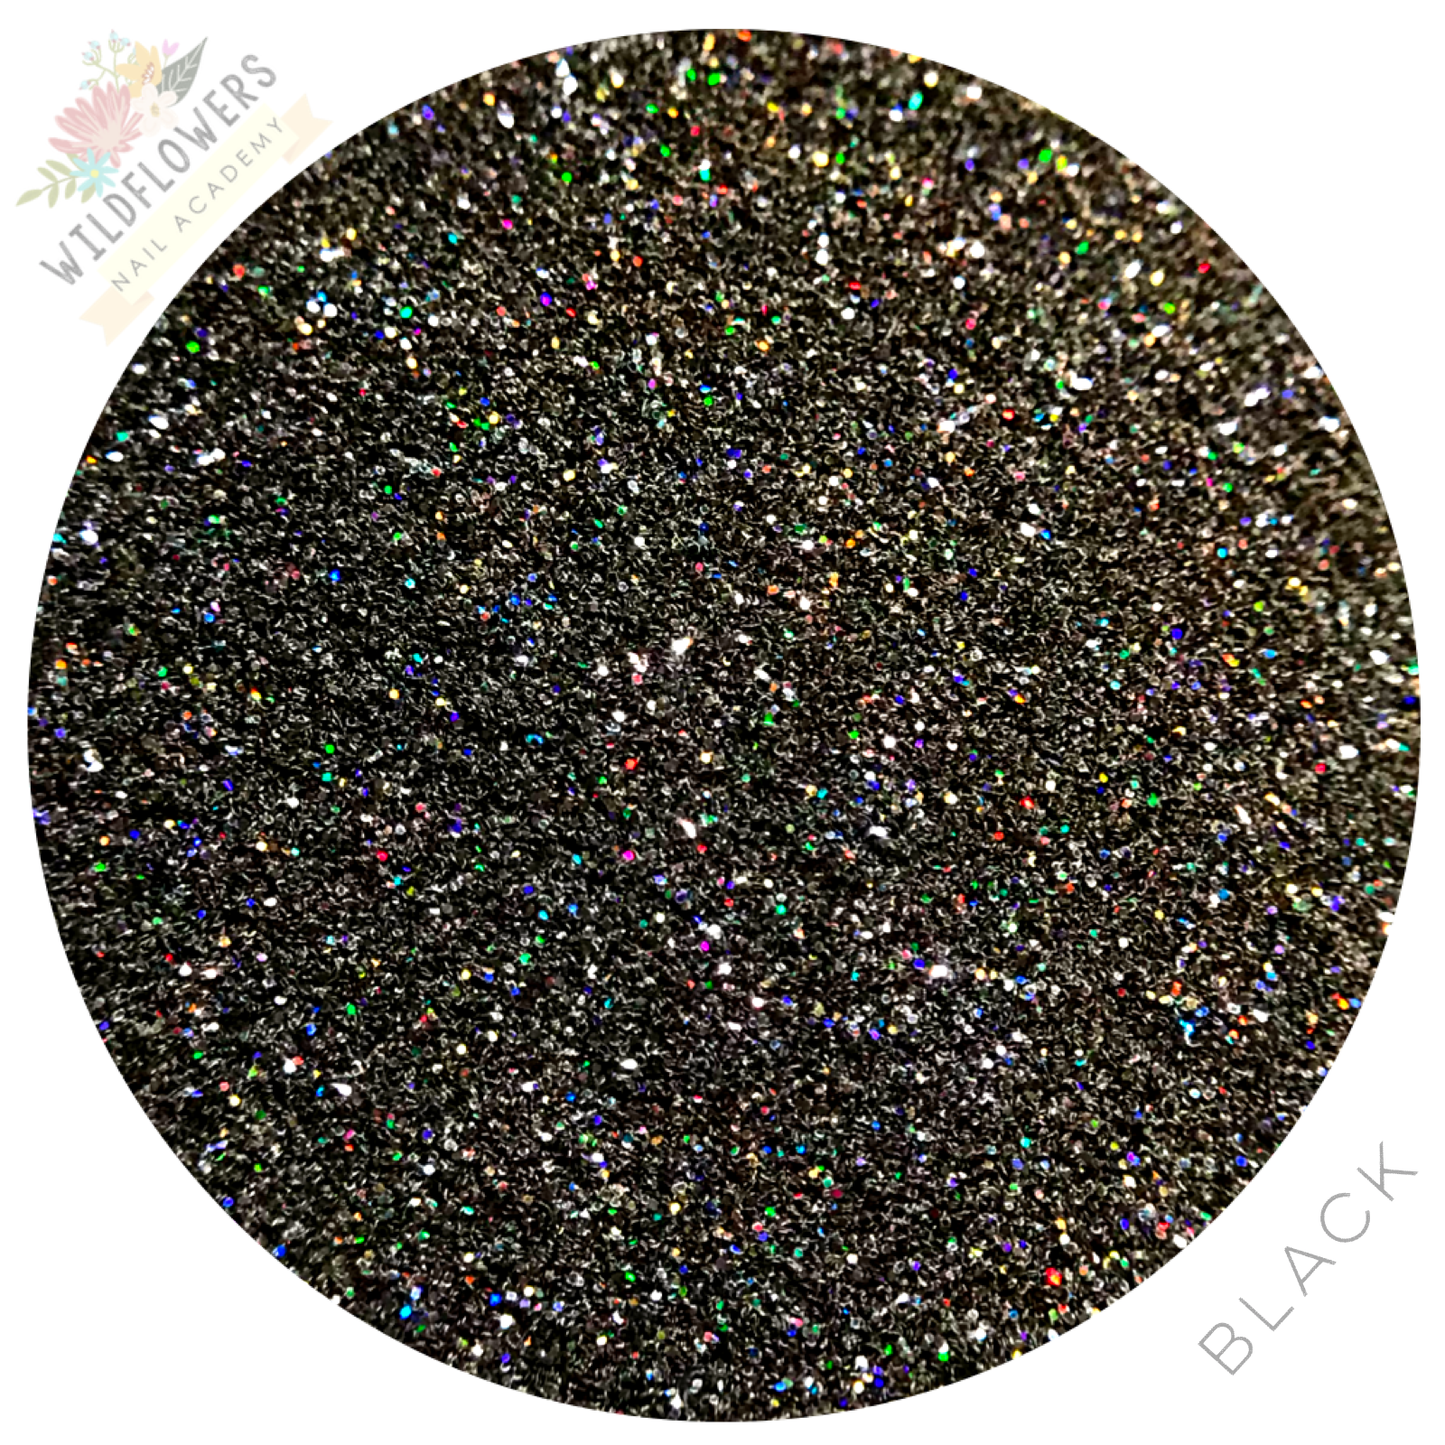 Glitter - Micro Holographic Sets